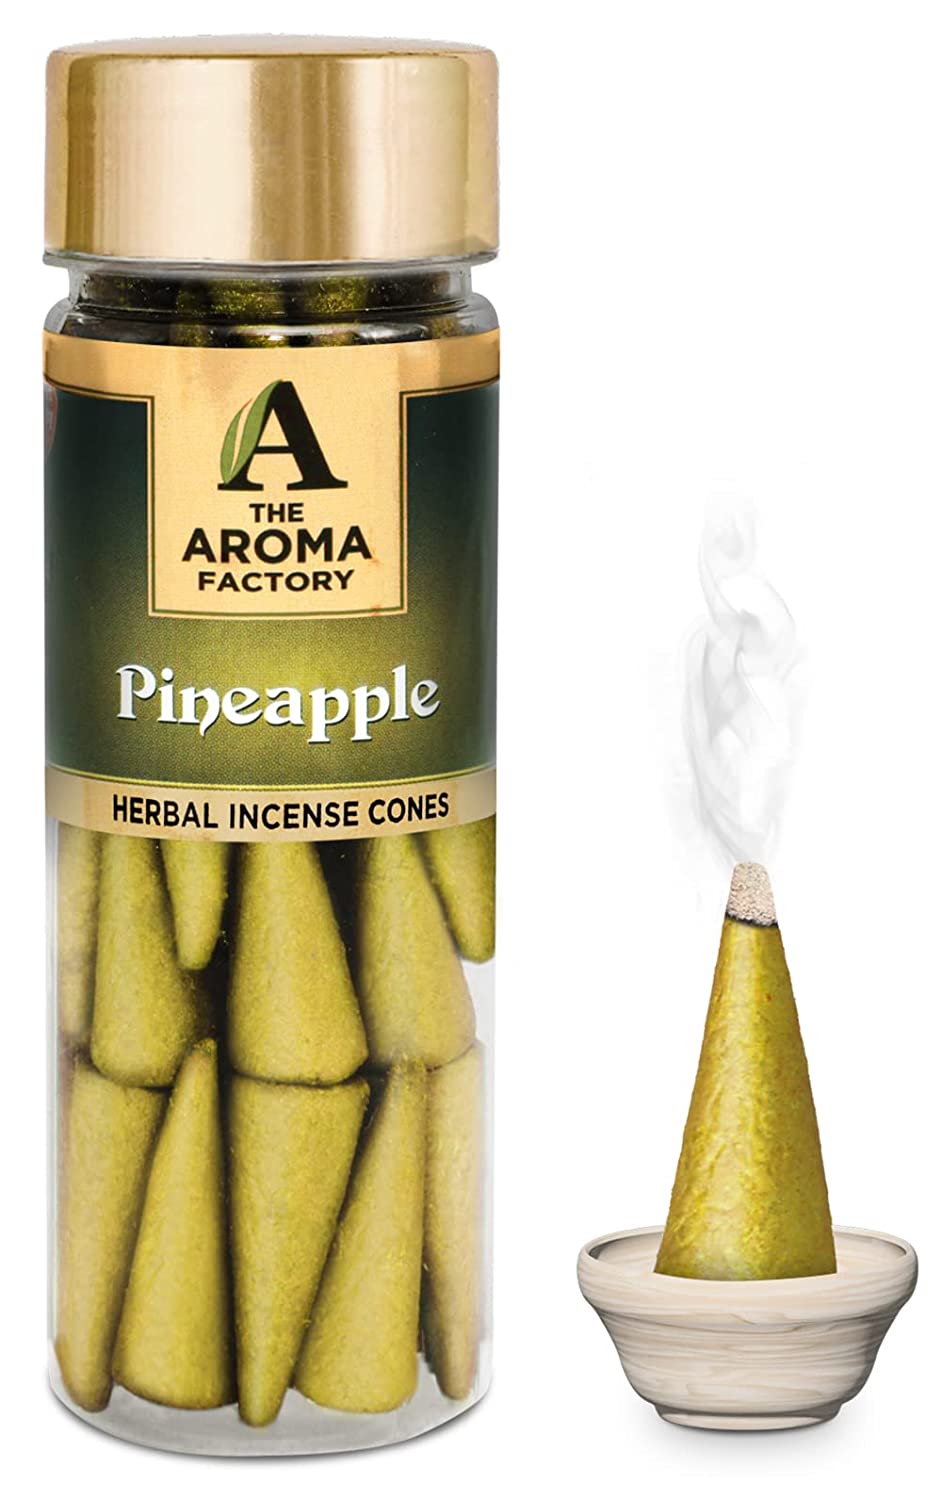 The Aroma Factory Incense Dhoop Cone for Pooja, Pineapple (100% Herbal & 0% Charcoal) 1 Bottle x 30 Cones